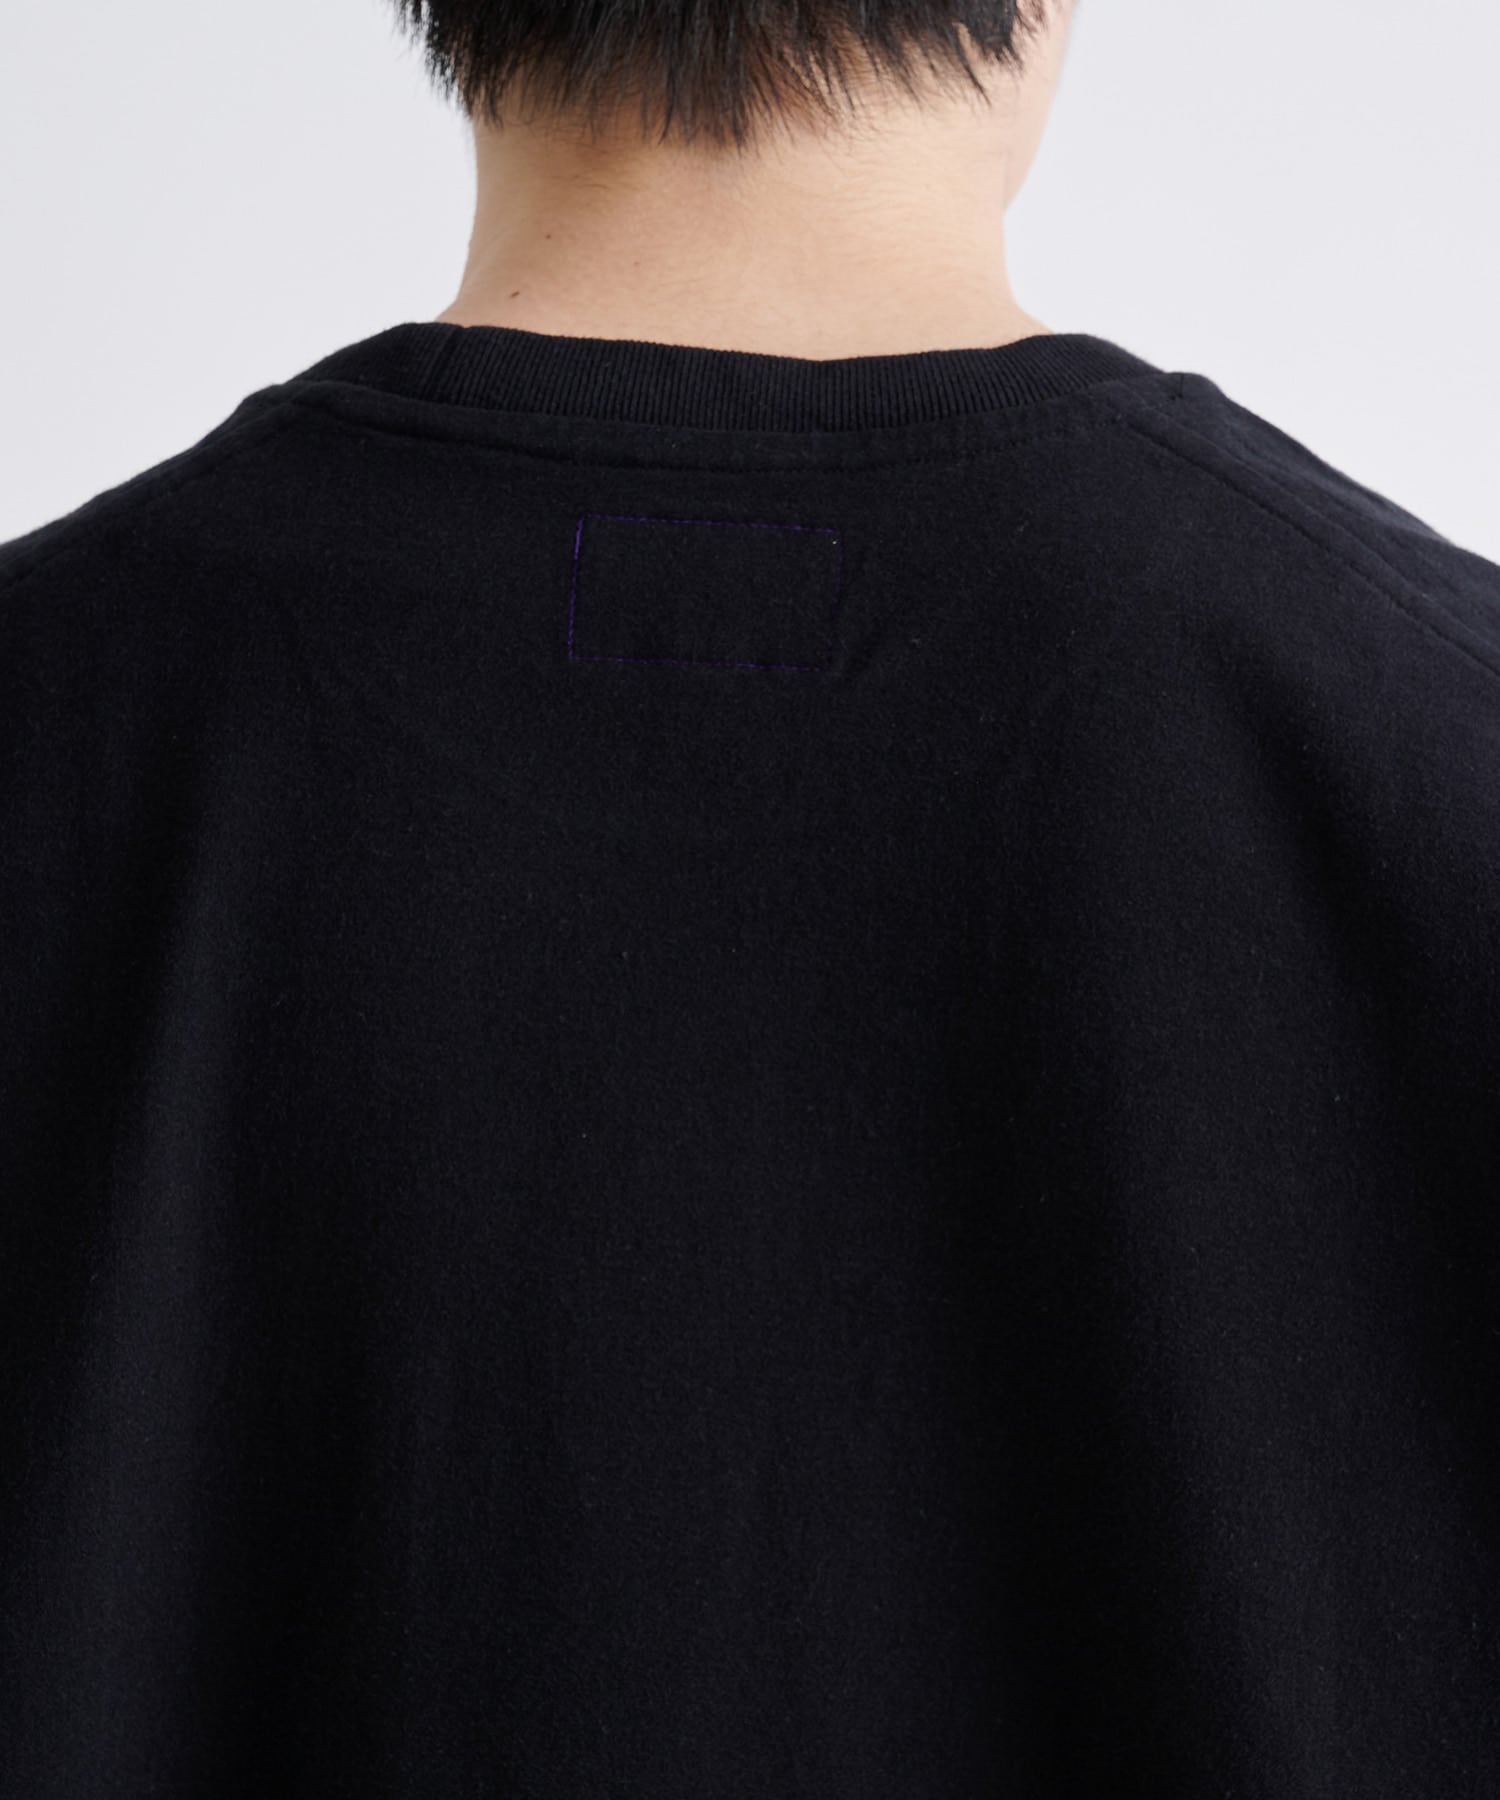 High Bulky Pocket Tee THE NORTH FACE PURPLE LABEL